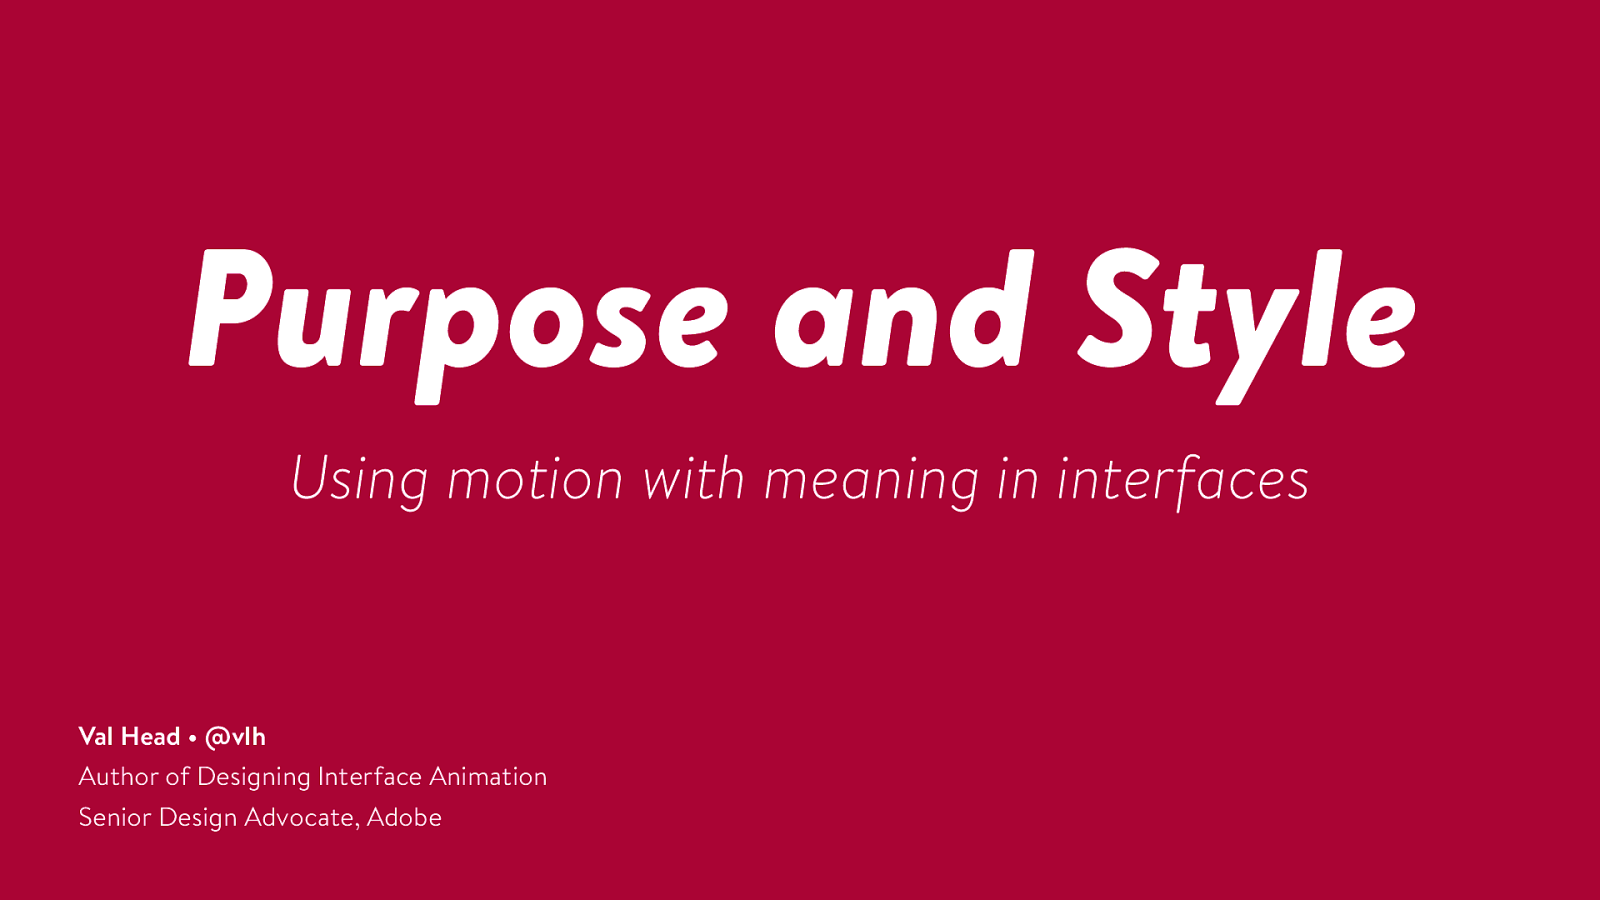 Purpose and Style: Using motion with meaning in interfaces